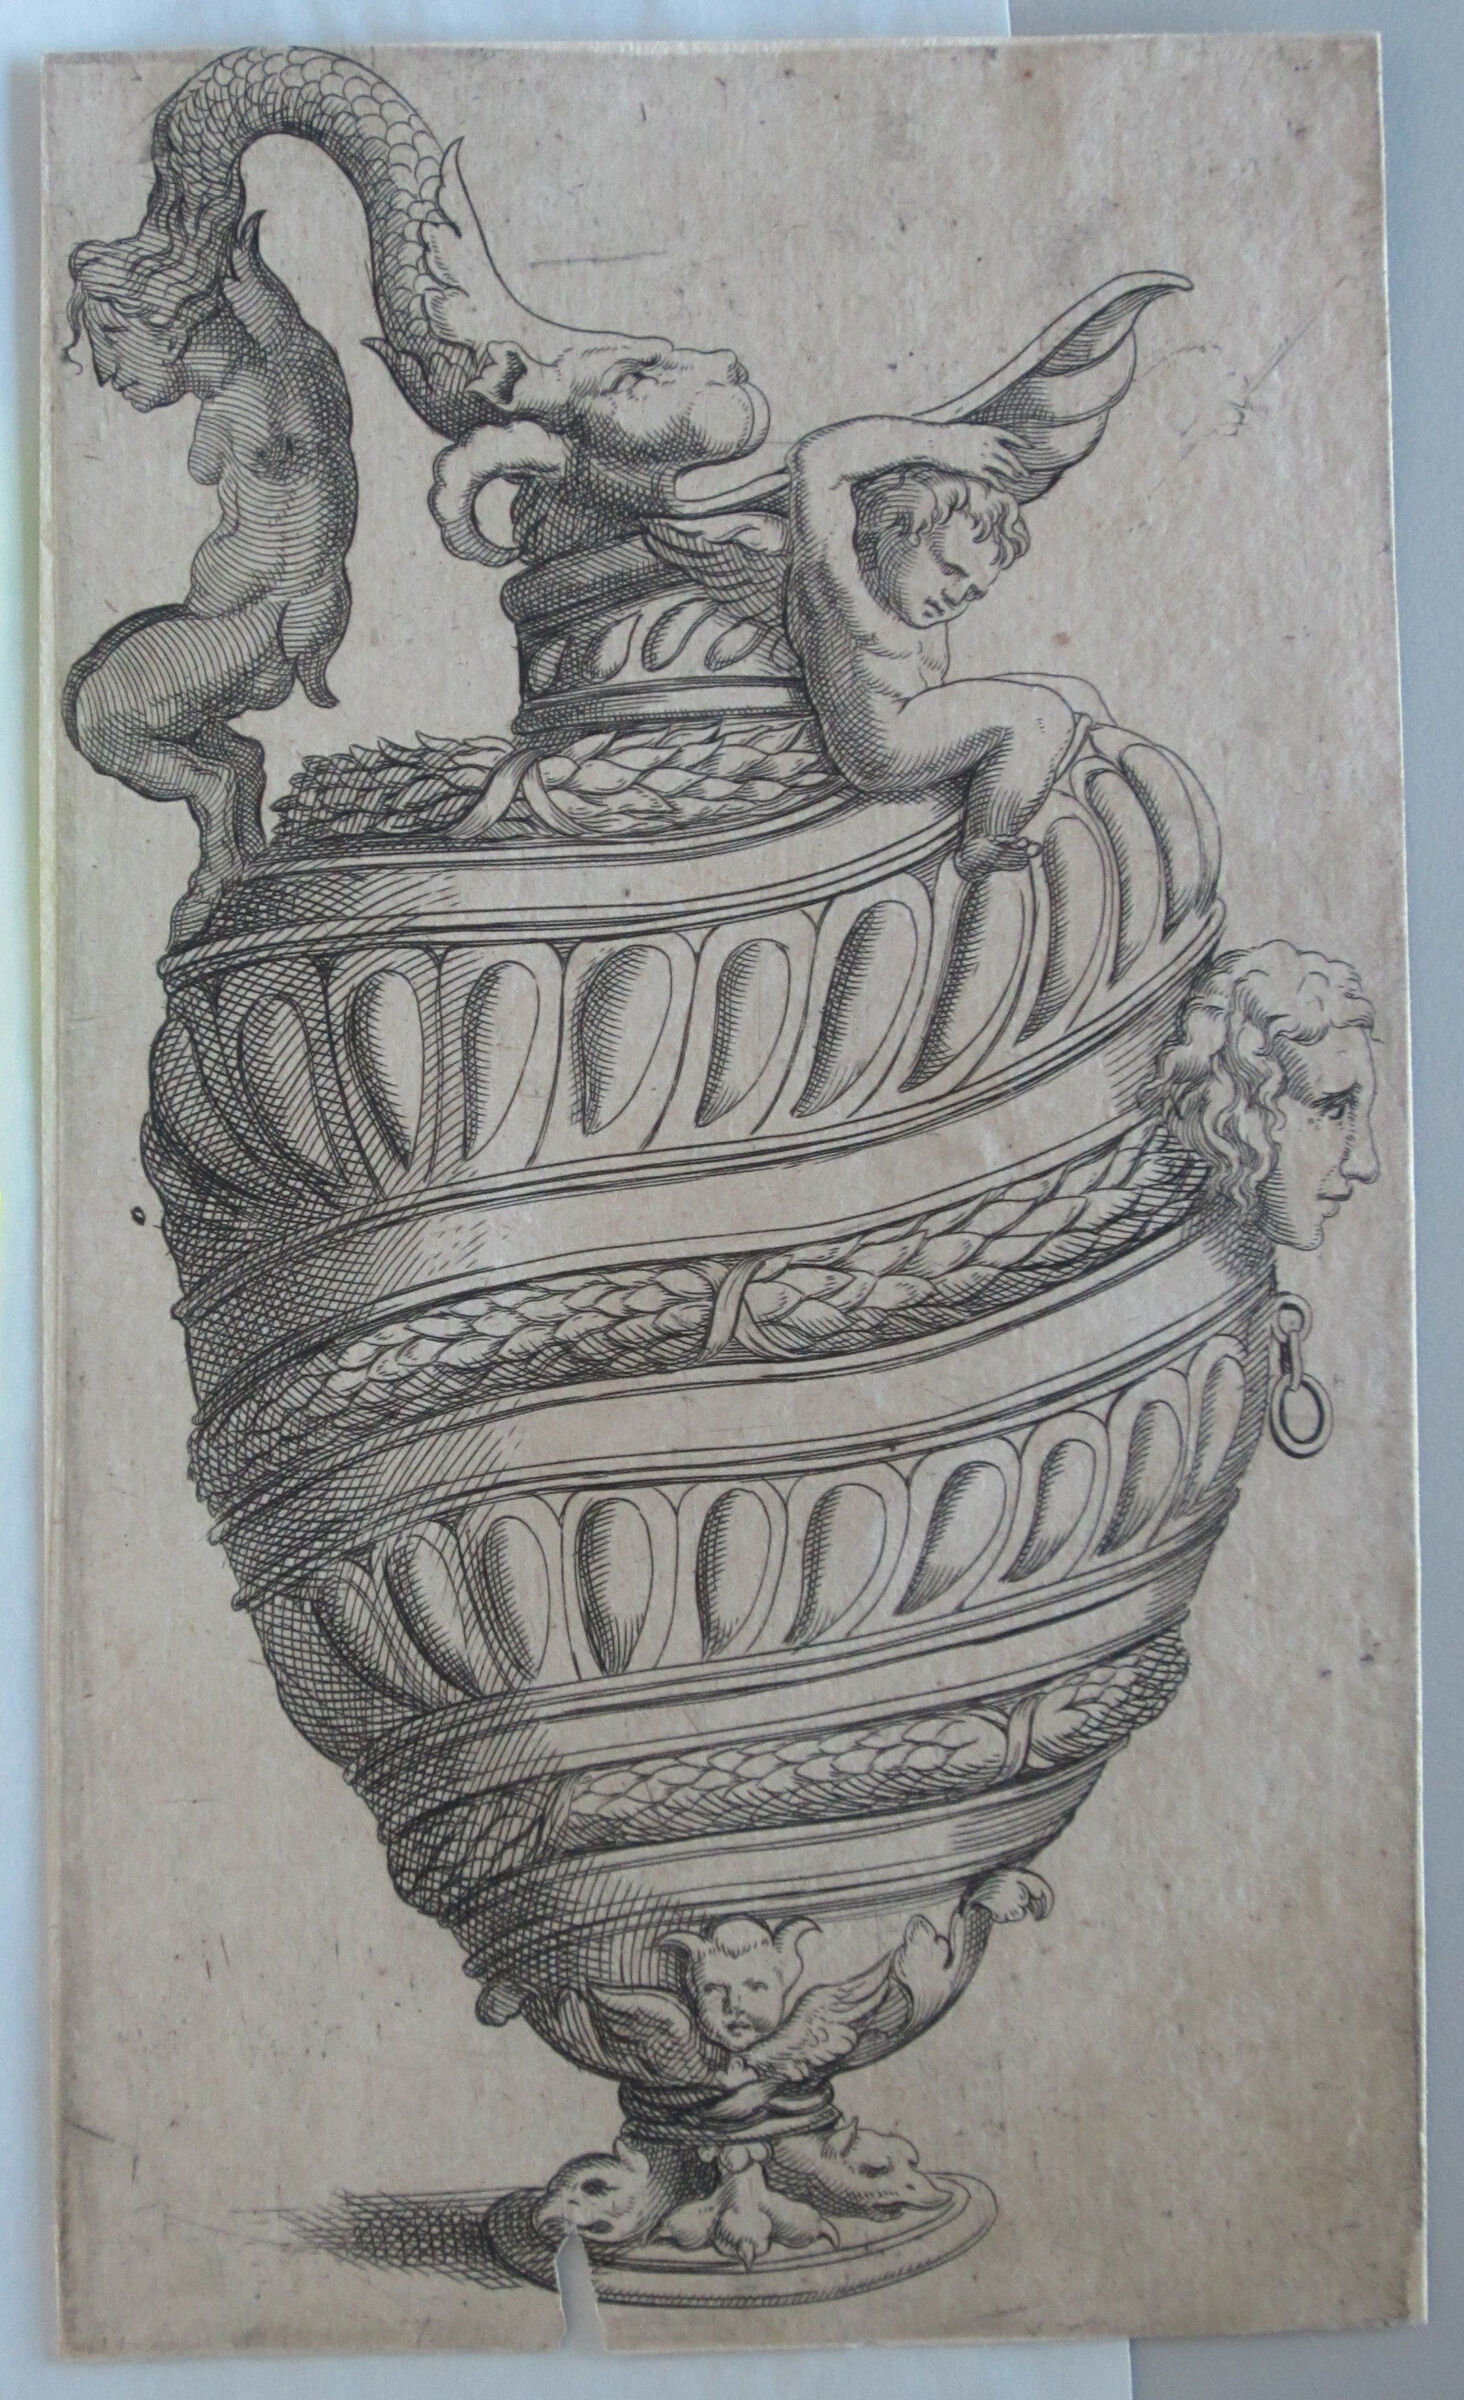 Ewer With Spiraling Bands Of Garlands And Gadrooning, Its Spout Supported By A Winged Putto